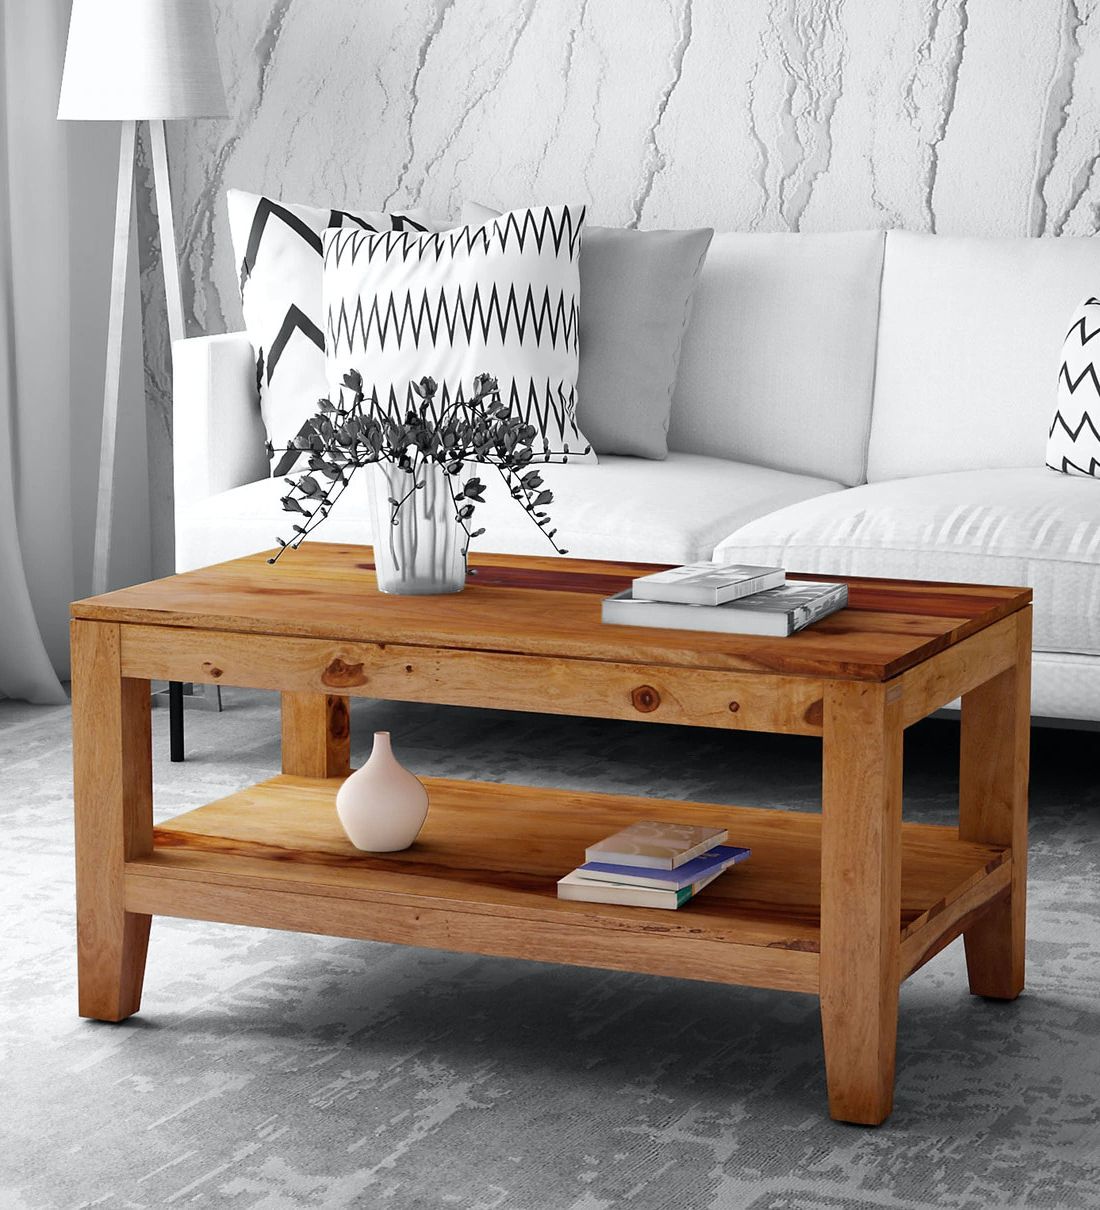 Most Recently Released Buy Anitz Solid Wood Coffee Table In Warm Walnut Finish Intended For Walnut Wood And Gold Metal Coffee Tables (View 15 of 20)